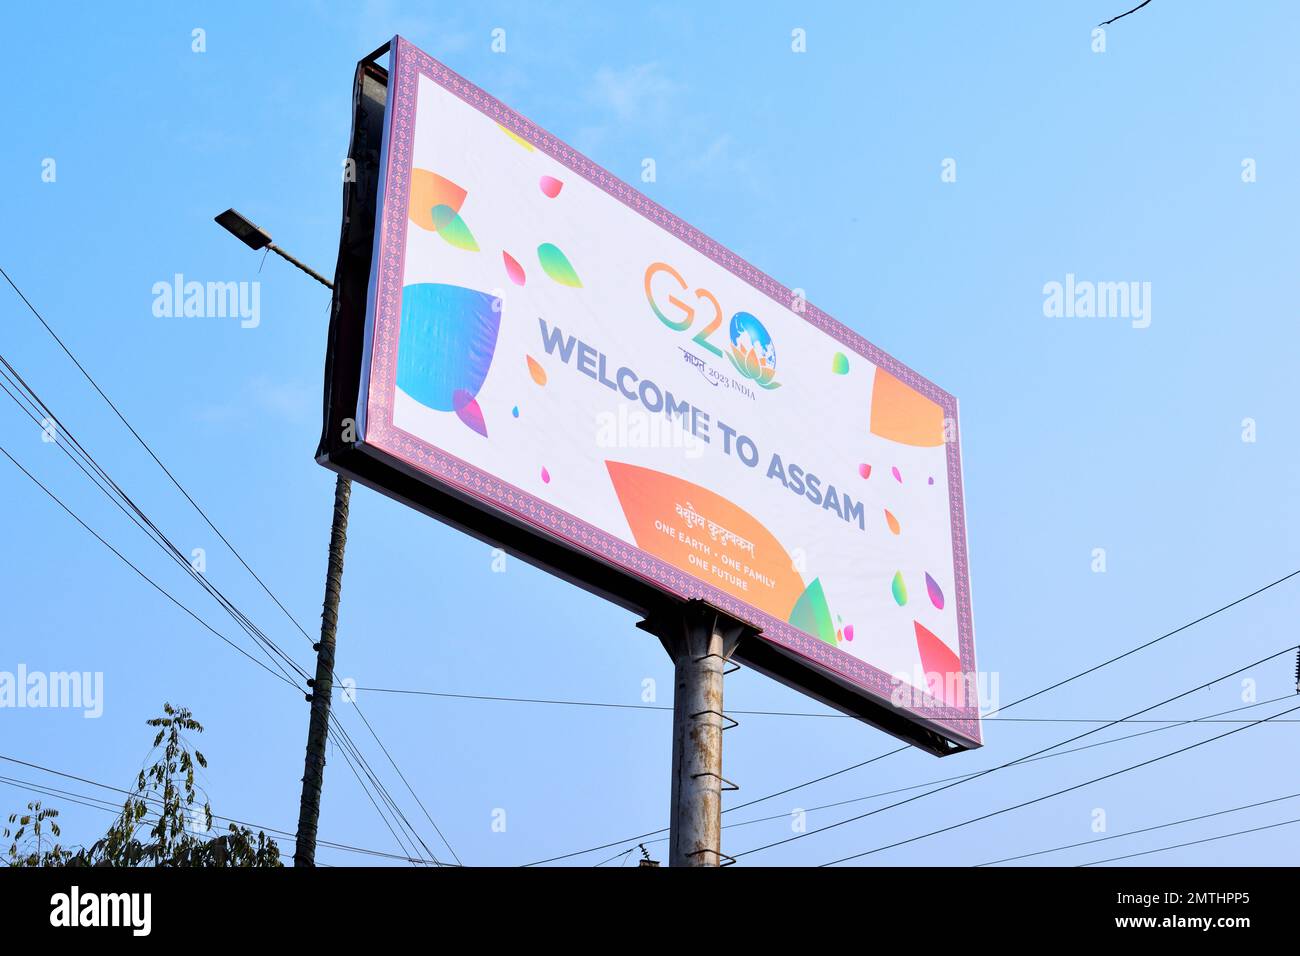 https://c8.alamy.com/comp/2MTHPP5/assam-set-to-host-1st-sfwg-meeting-under-indias-g20-presidency-from-2nd-february-in-guwahati-with-theme-one-earth-one-family-one-future-2MTHPP5.jpg